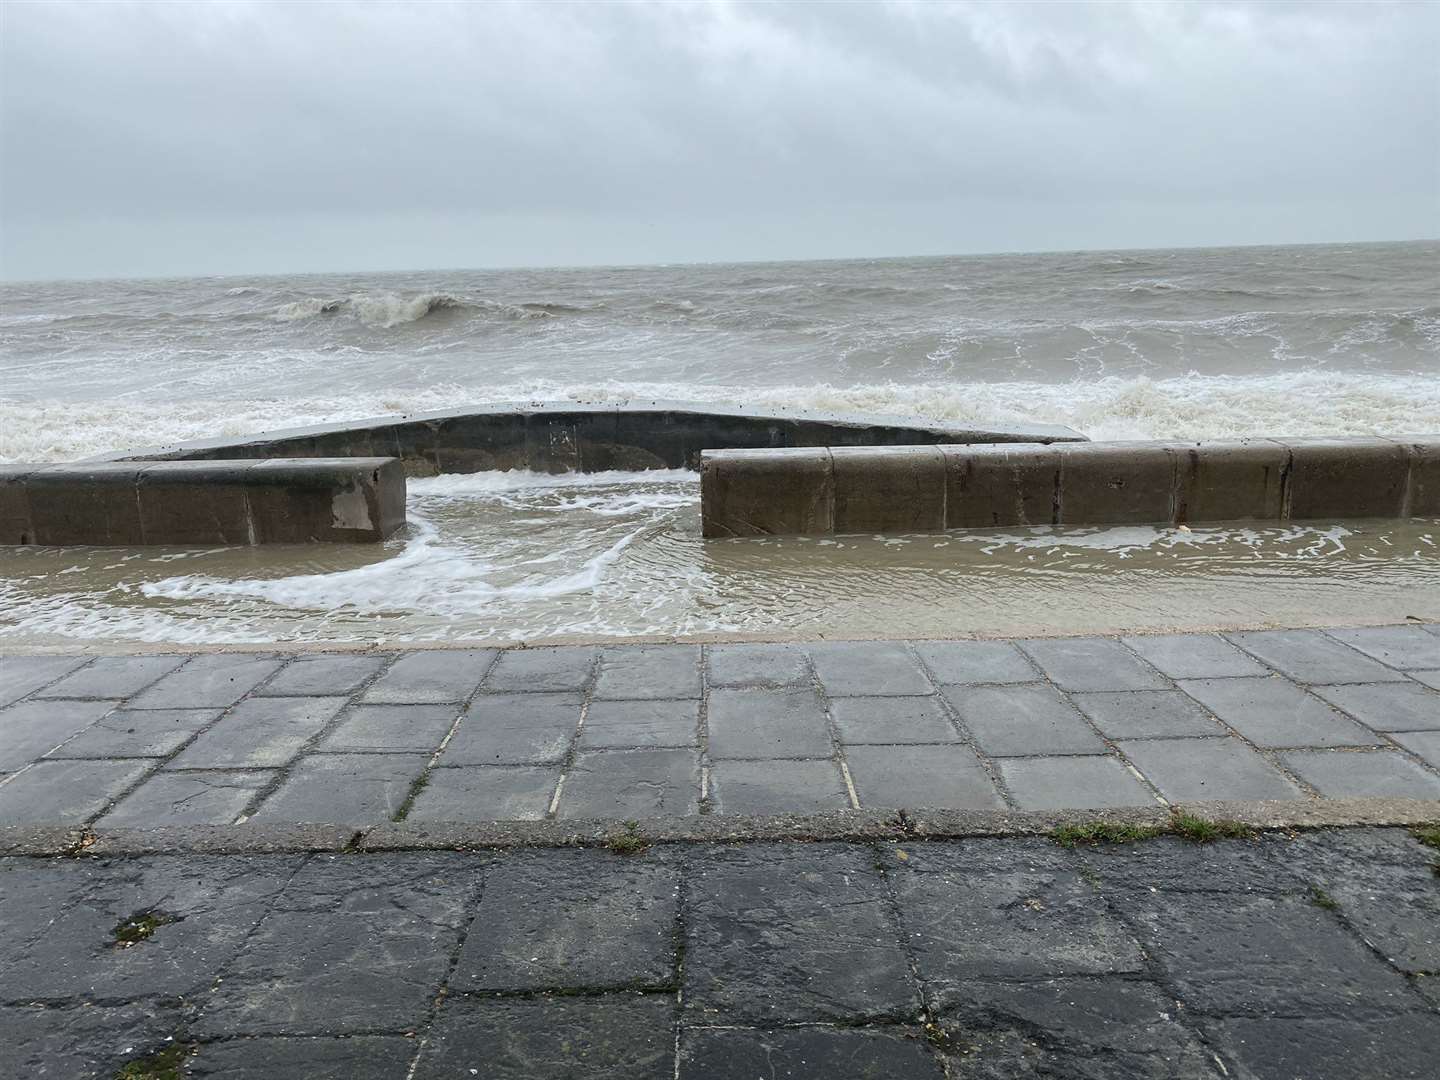 The waves are flowing over the sea wall in Sandgate. Pic: @Vixxta via Twitter (18013399)